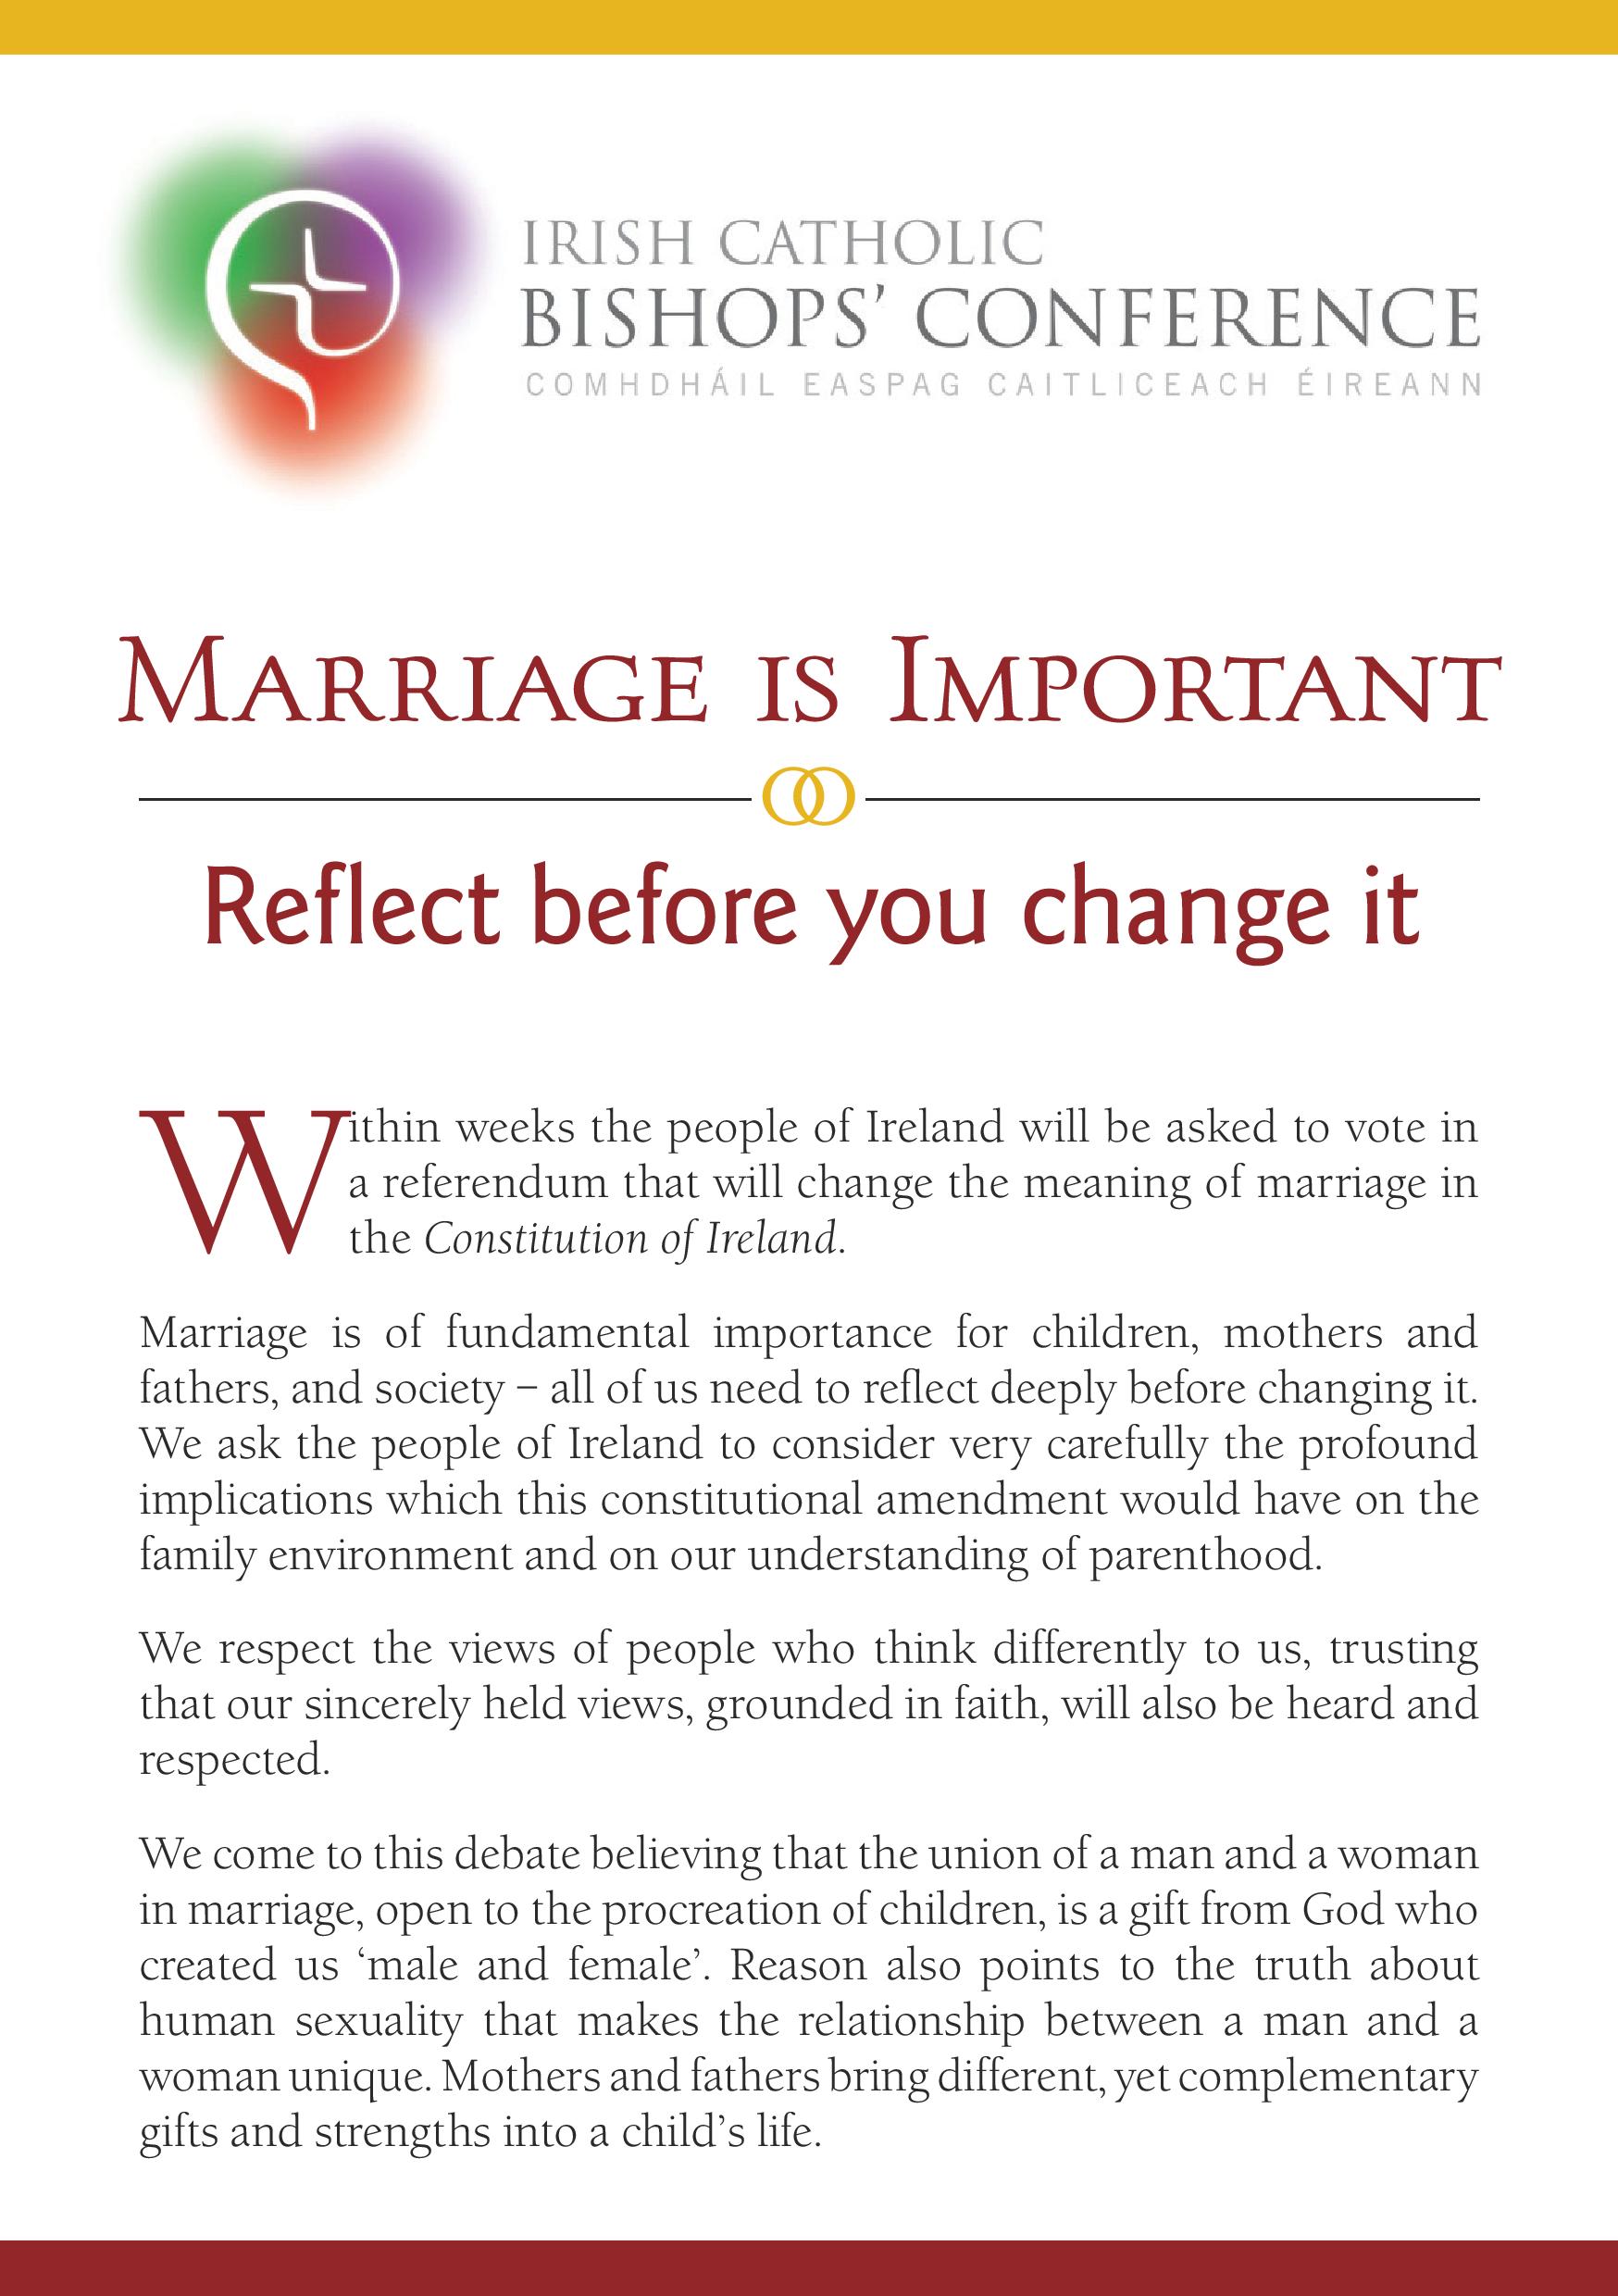 what is the importance of marriage